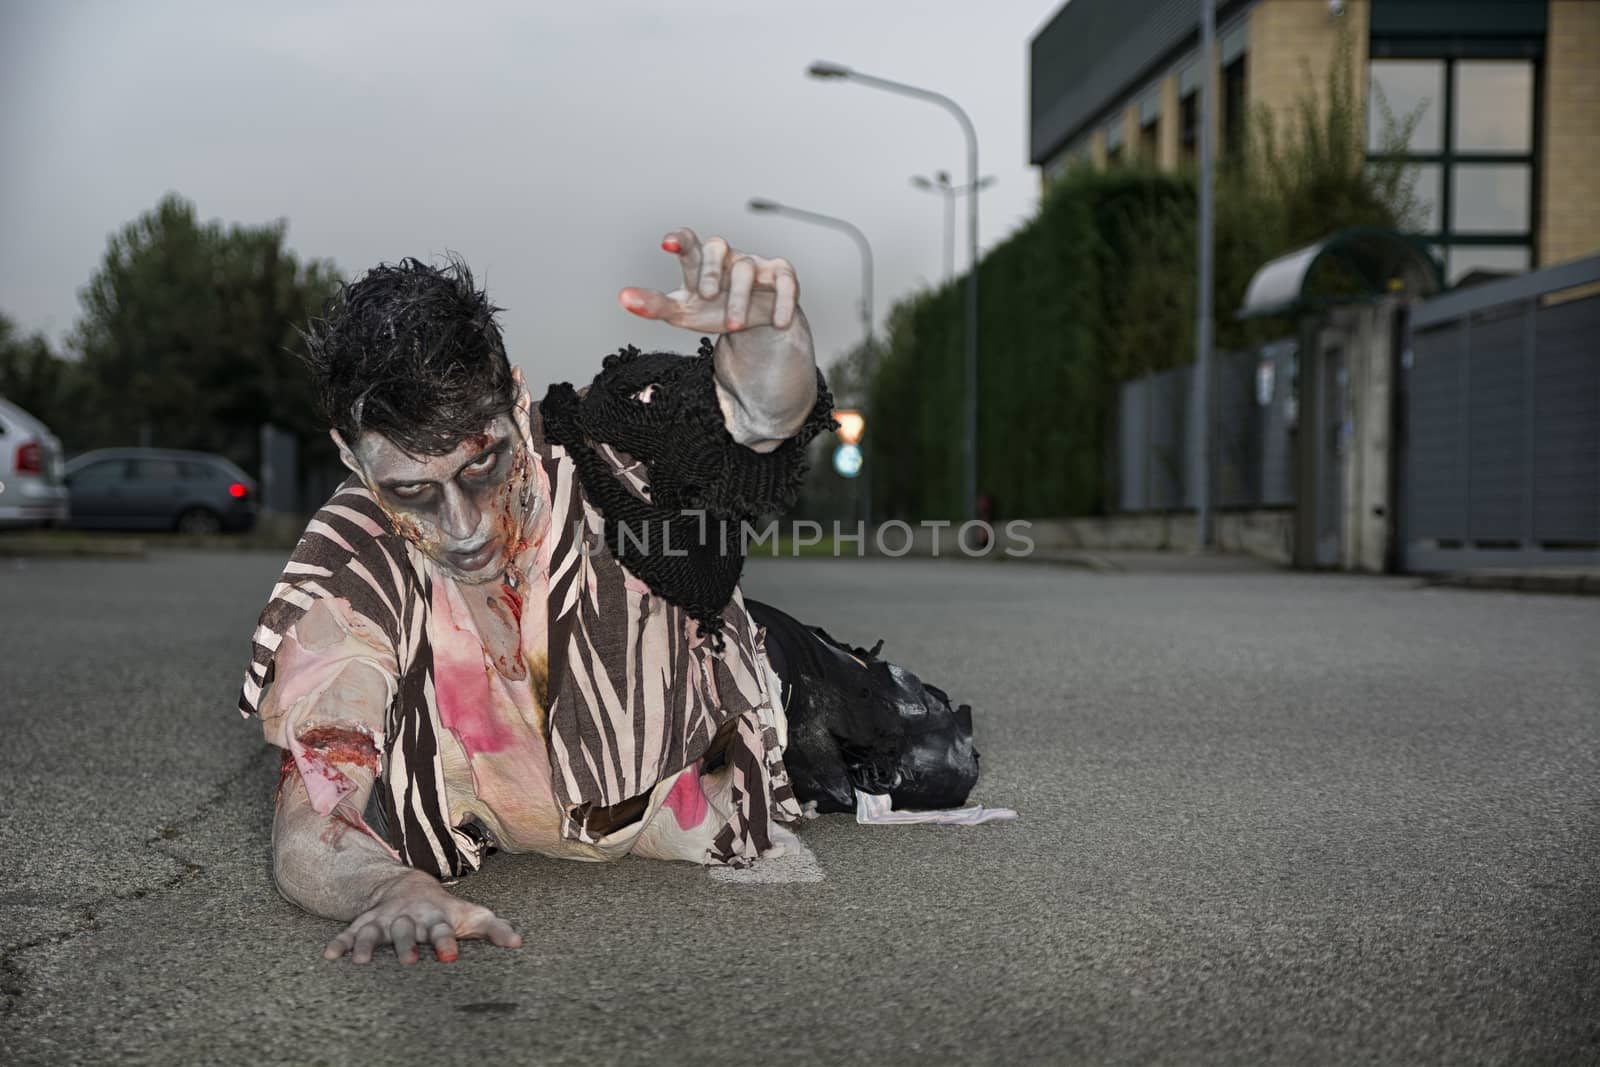 Male zombie crawling on his knees, on empty city street by artofphoto